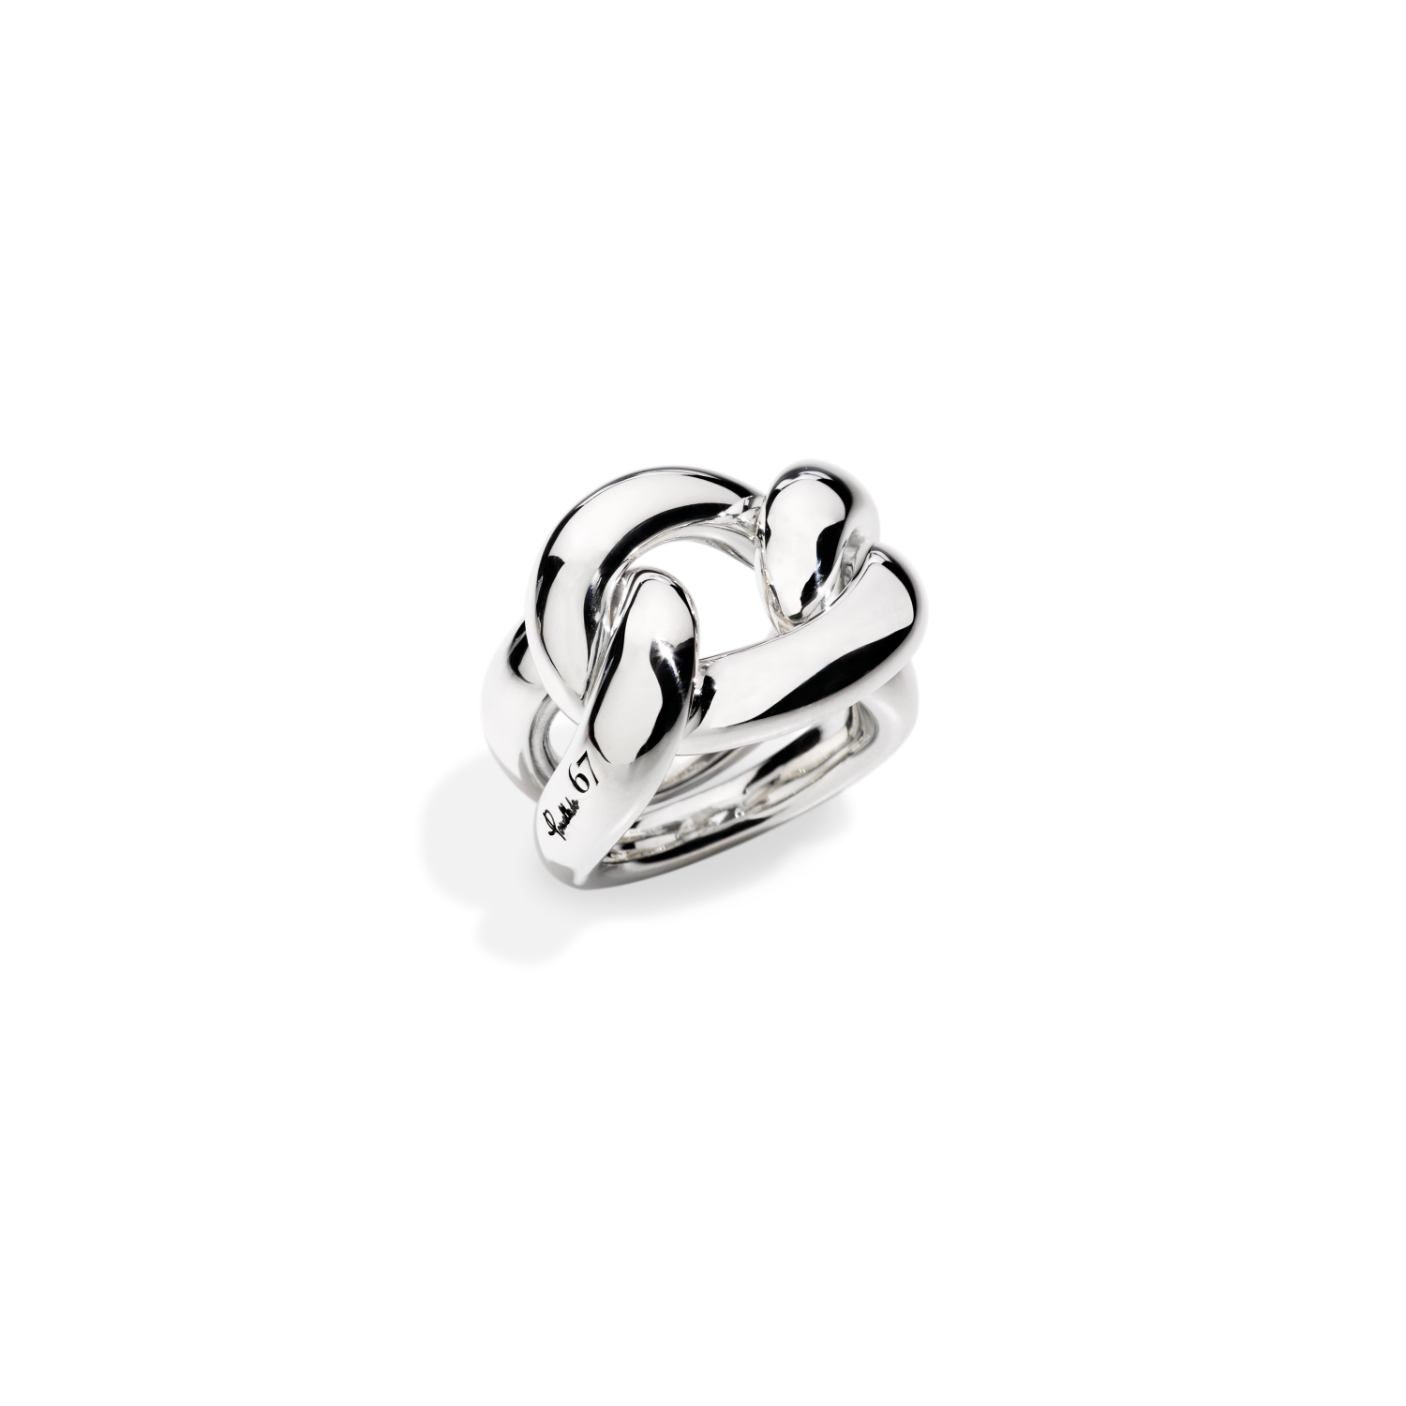 PAB2001_AG000_000ND_010_Pomellato_ring-argento-gourmette-silver.png